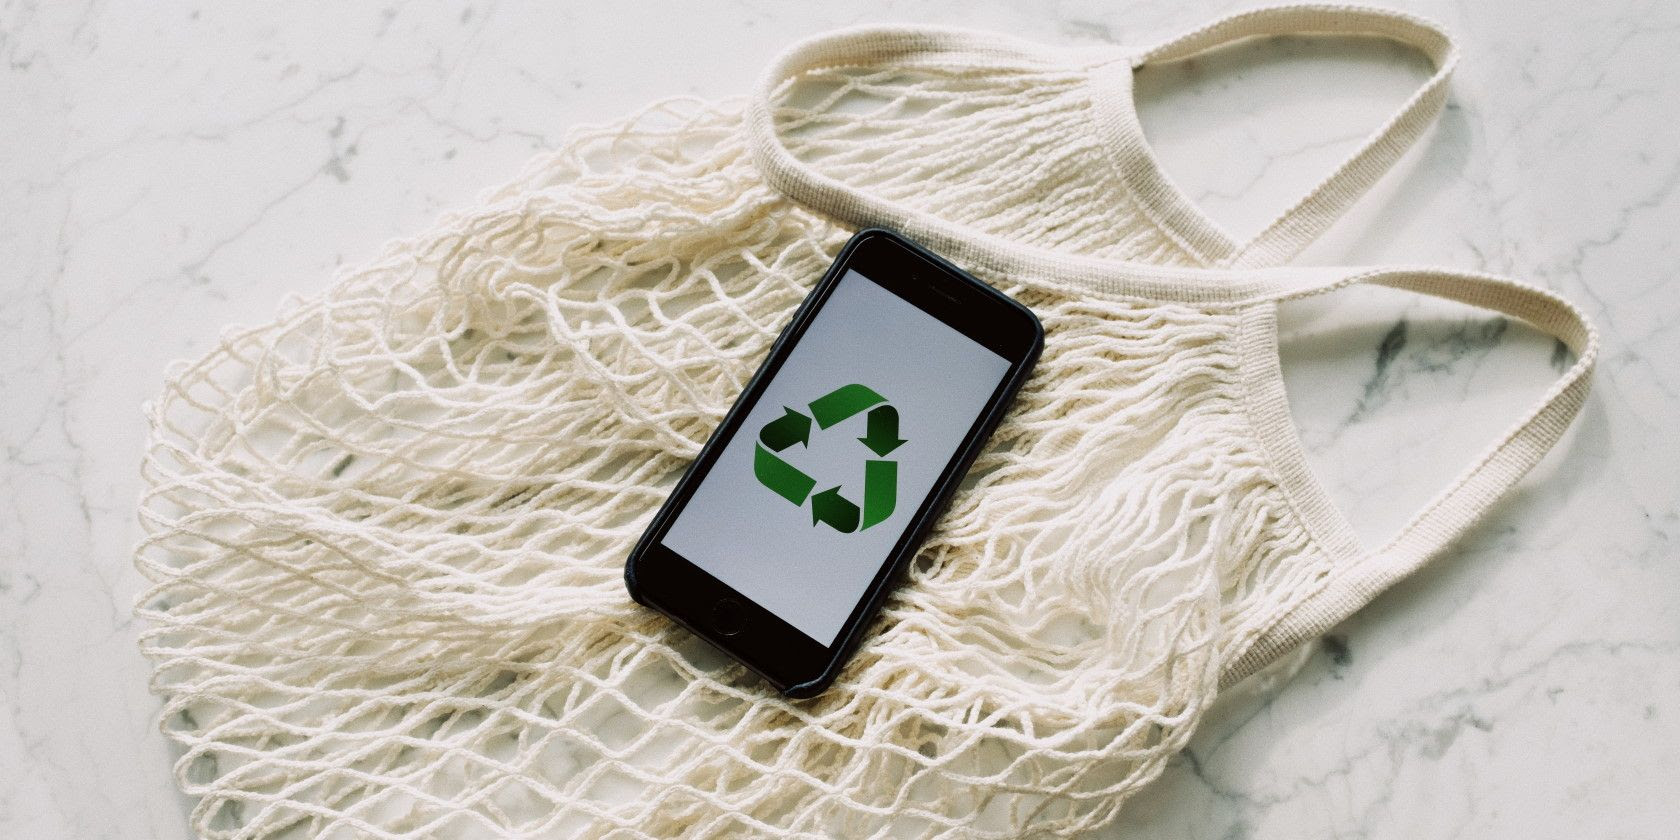 Learn More About Going Zero-Waste From These 8 YouTube Channels